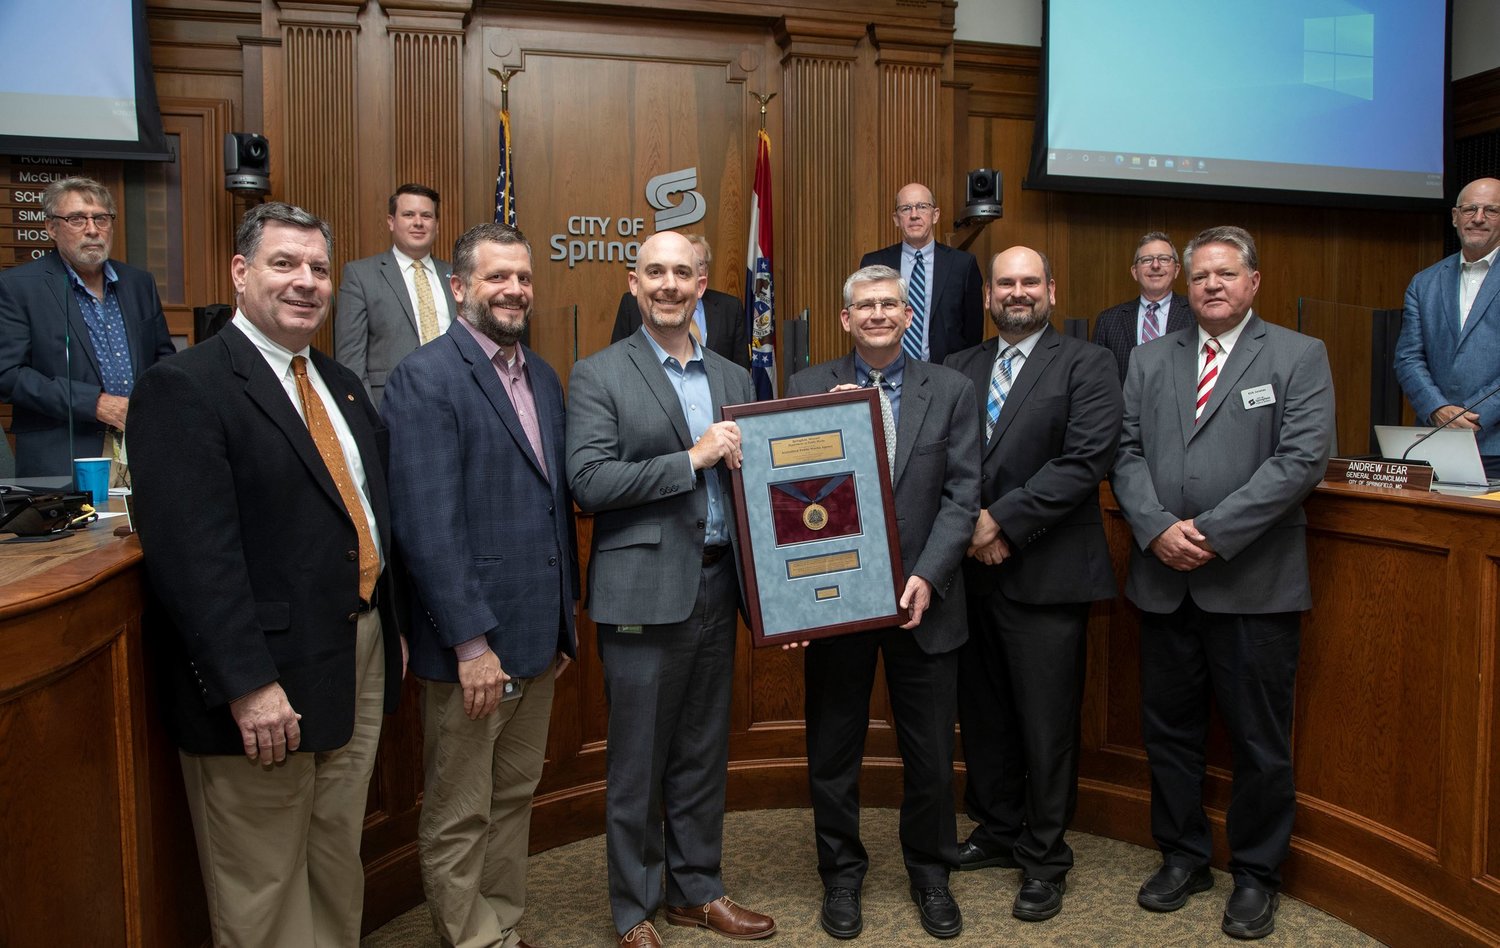 Leaders of the city's Public Works and Environmental Services departments display their reaccreditation plaque in council chambers.